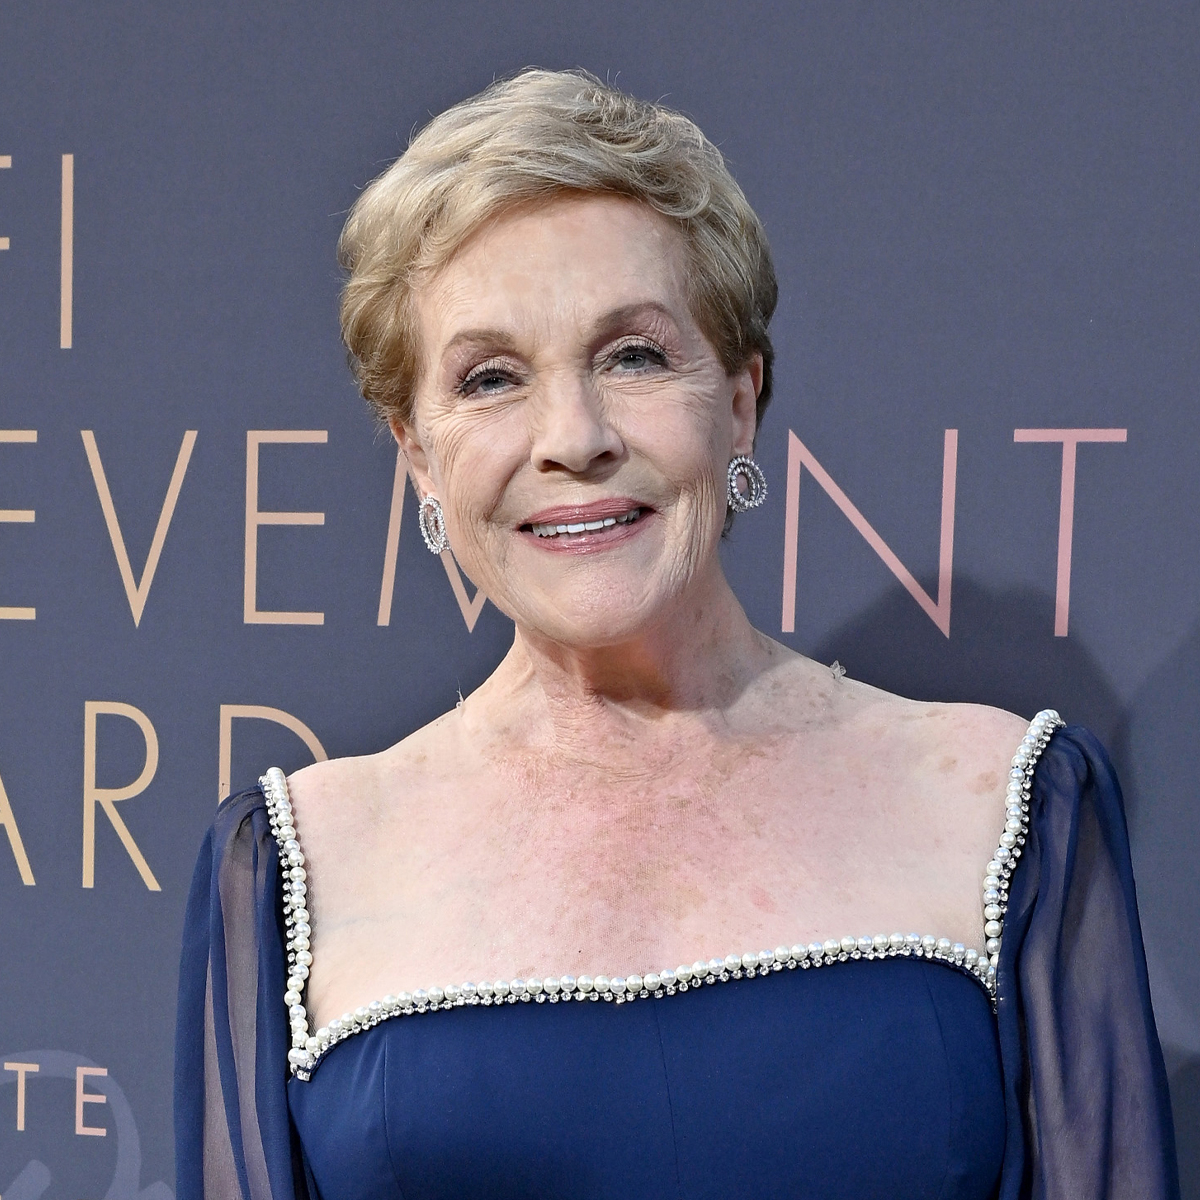 Julie Andrews Shares Insight Into Bond With "Lovely" Anne Hathaway